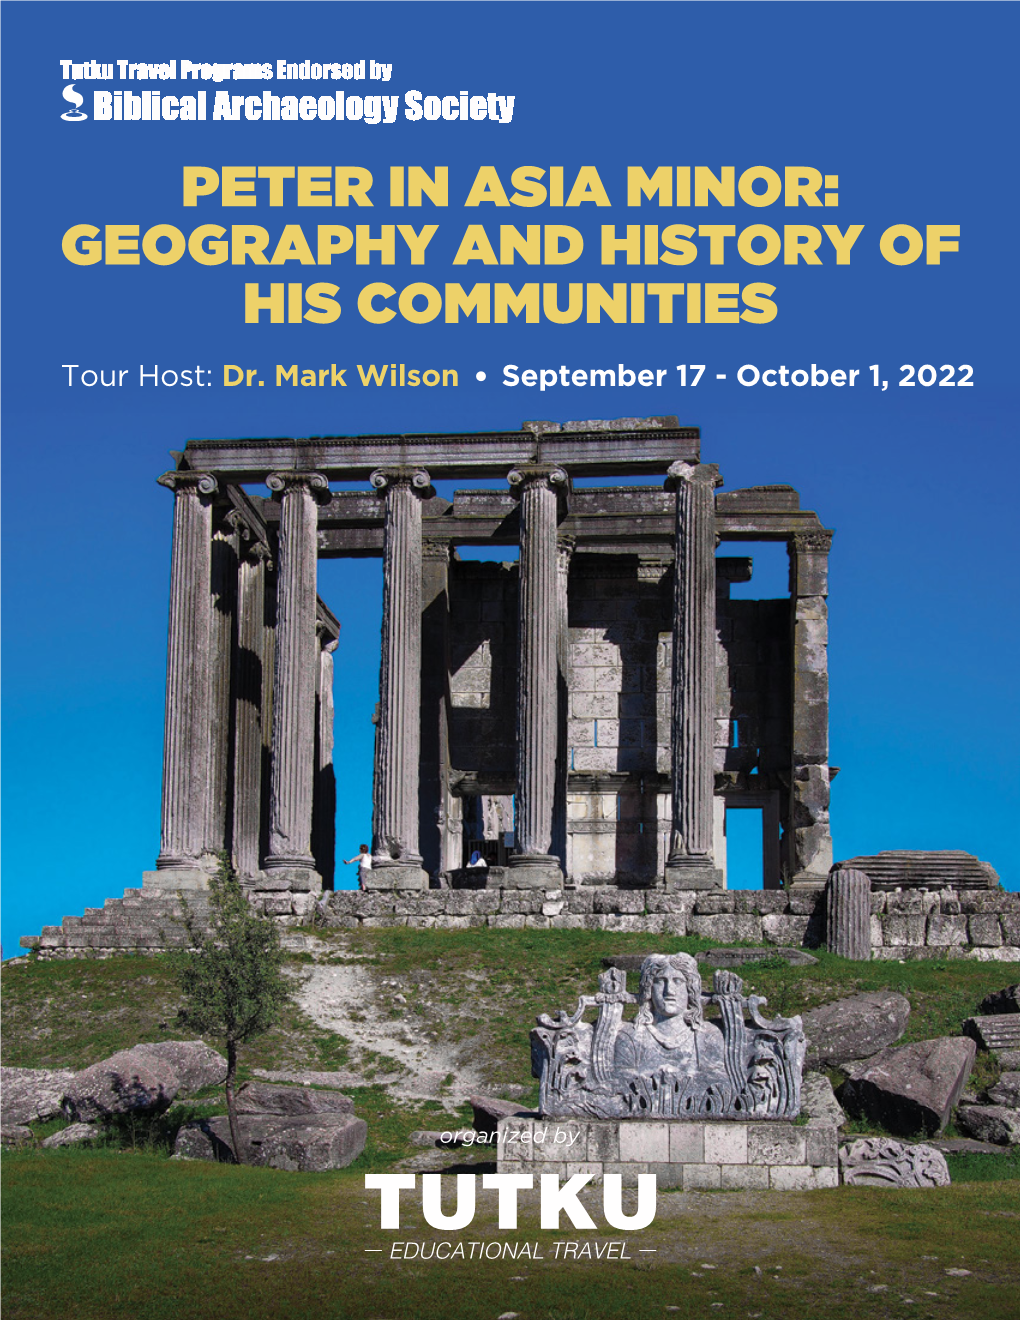 PETER in ASIA MINOR: GEOGRAPHY and HISTORY of HIS COMMUNITIES Tour Host: Dr